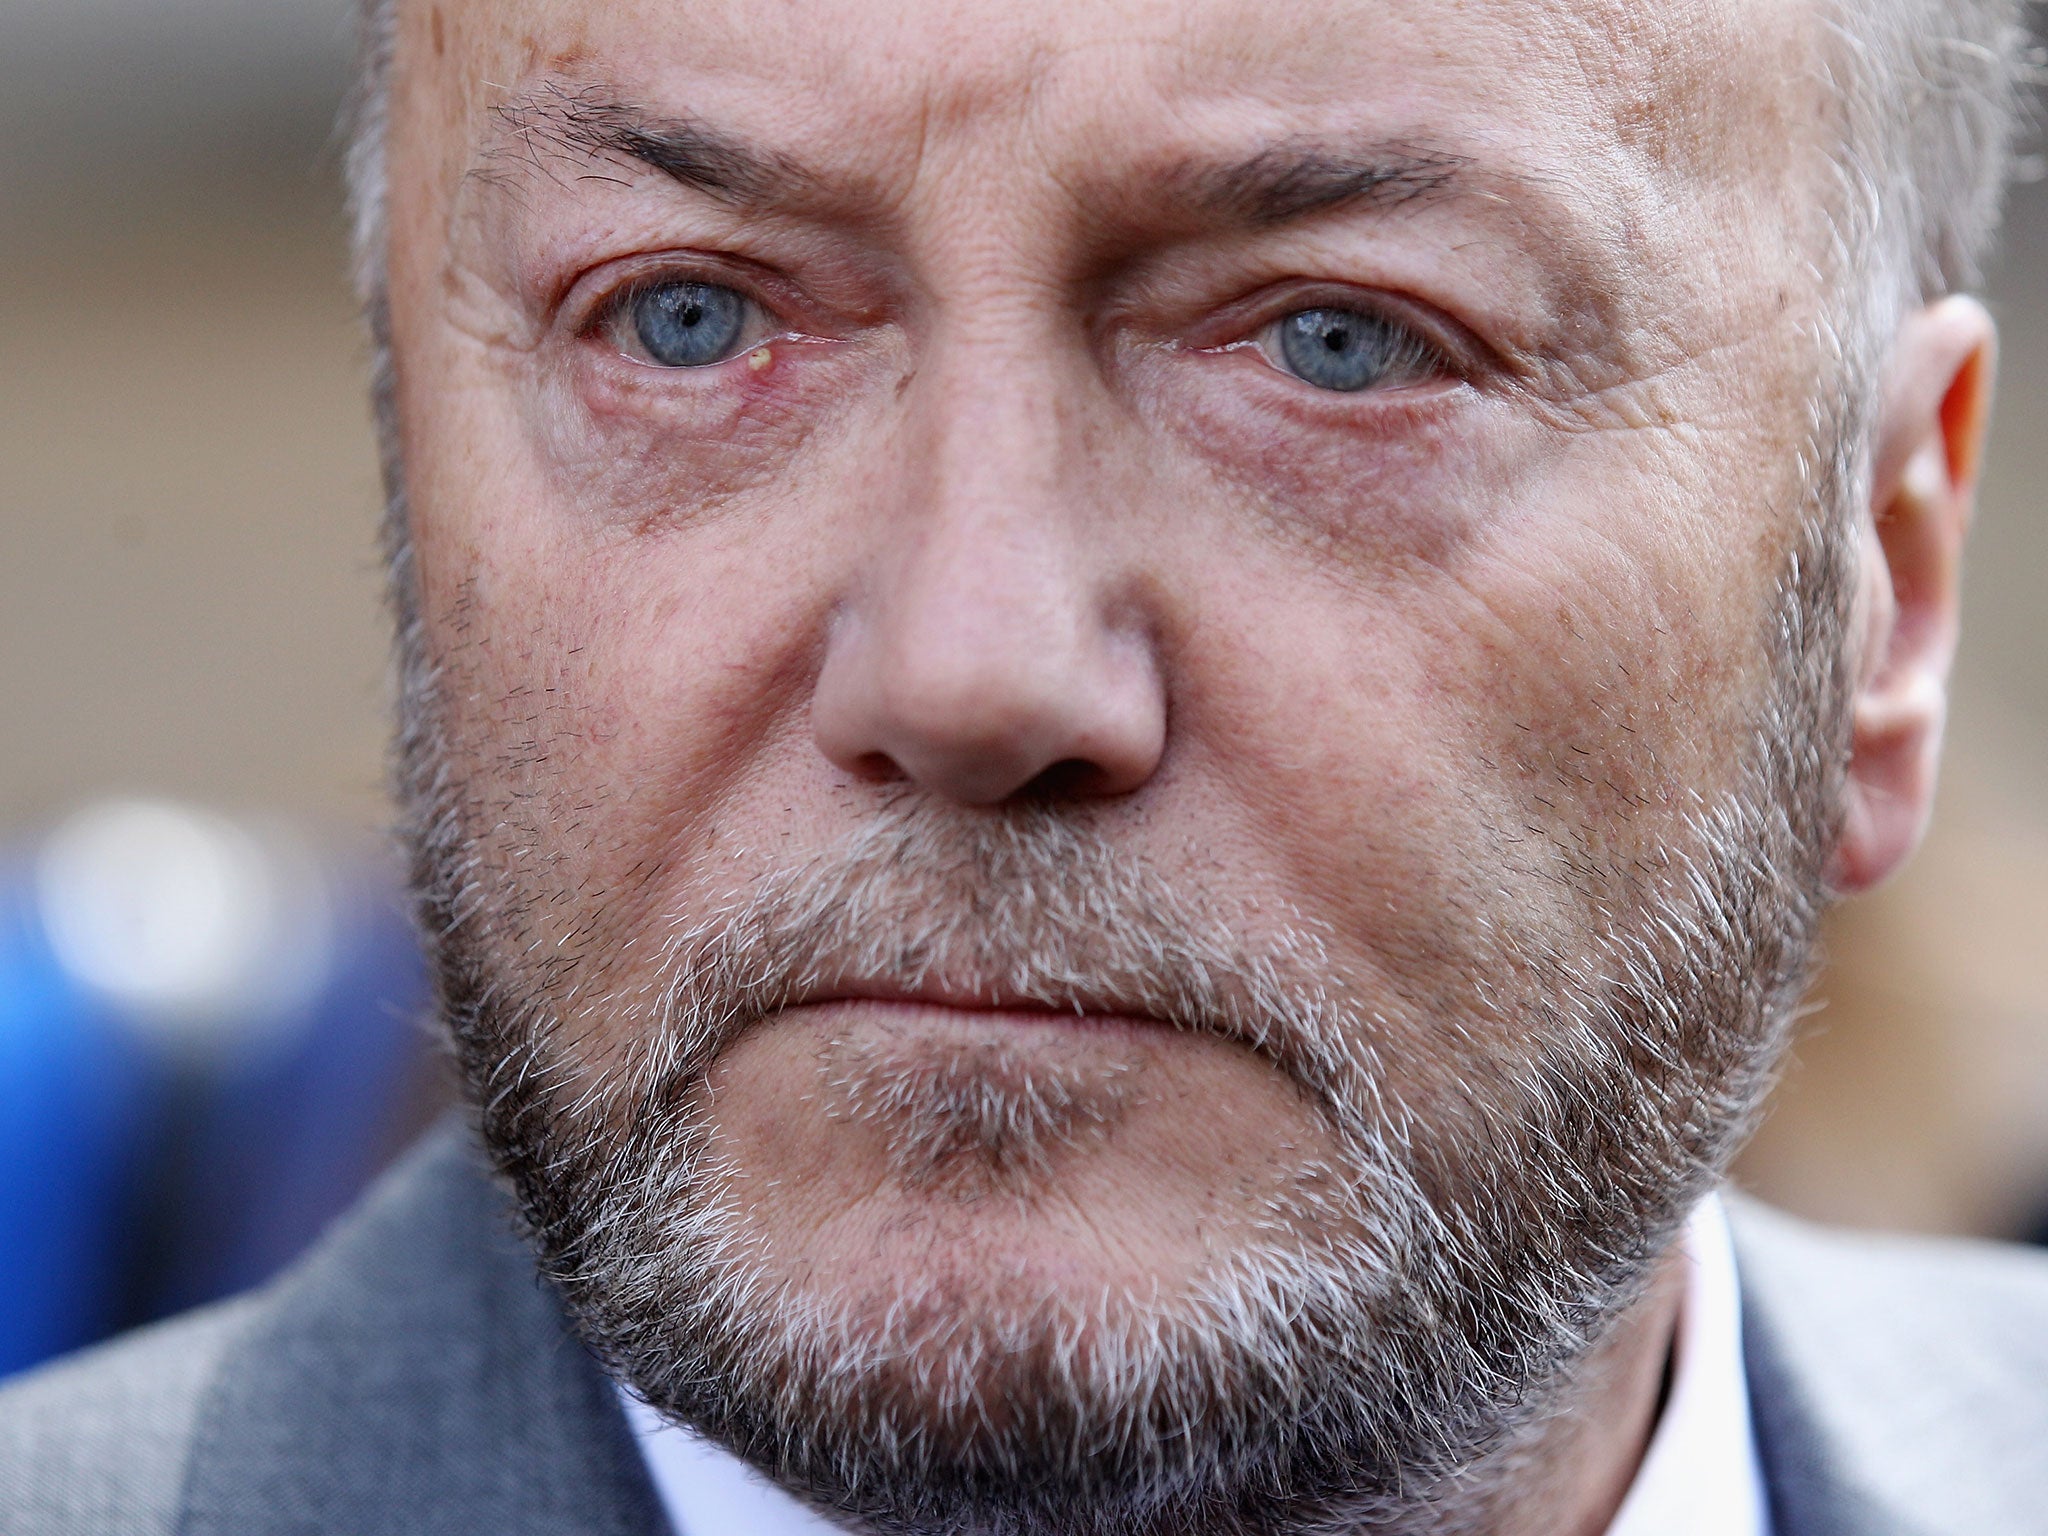 George Galloway's speech is being hailed as a landmark oration which could help save the Union.